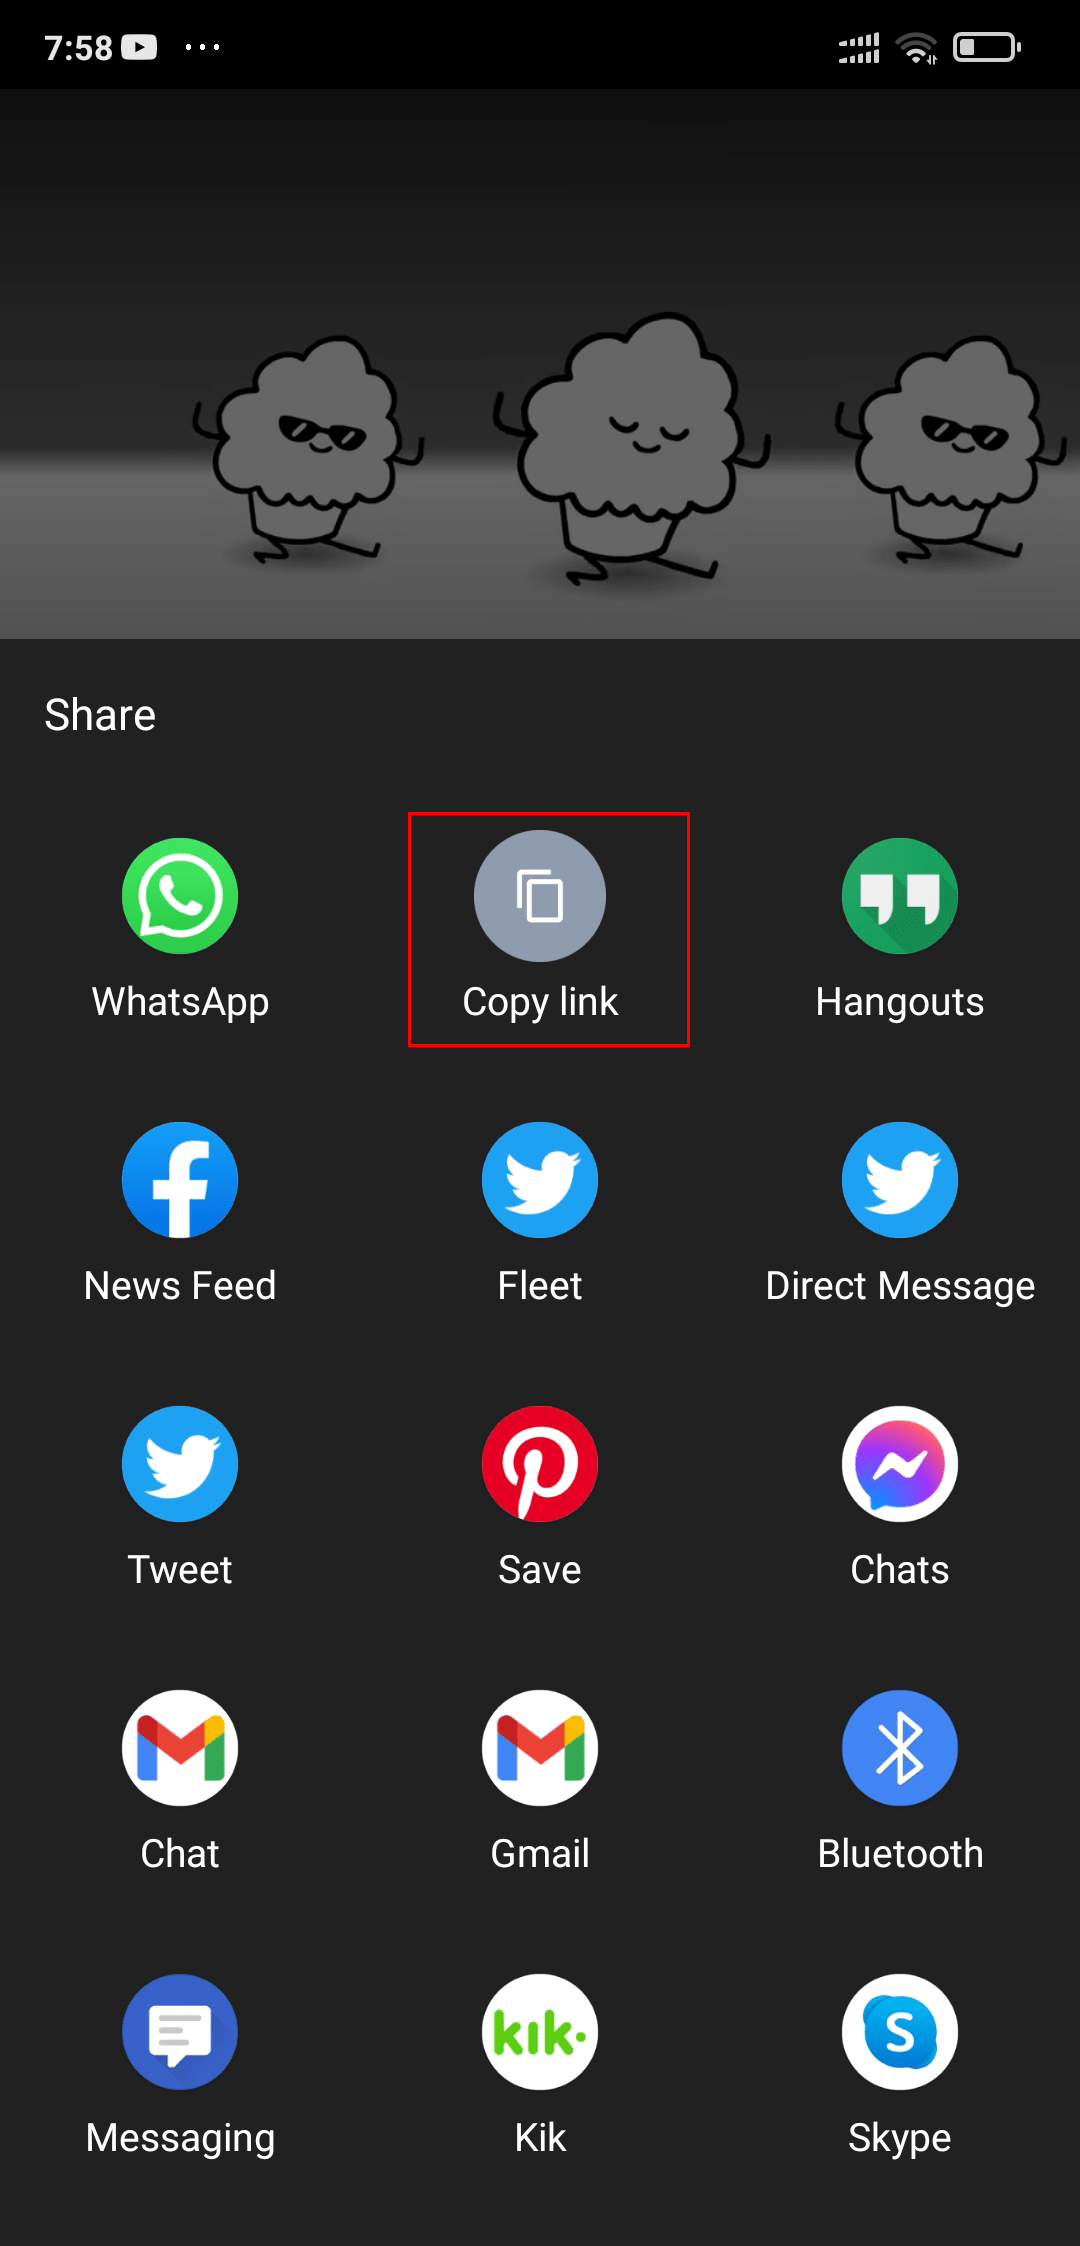 tap on the share button and select copy to clipboard